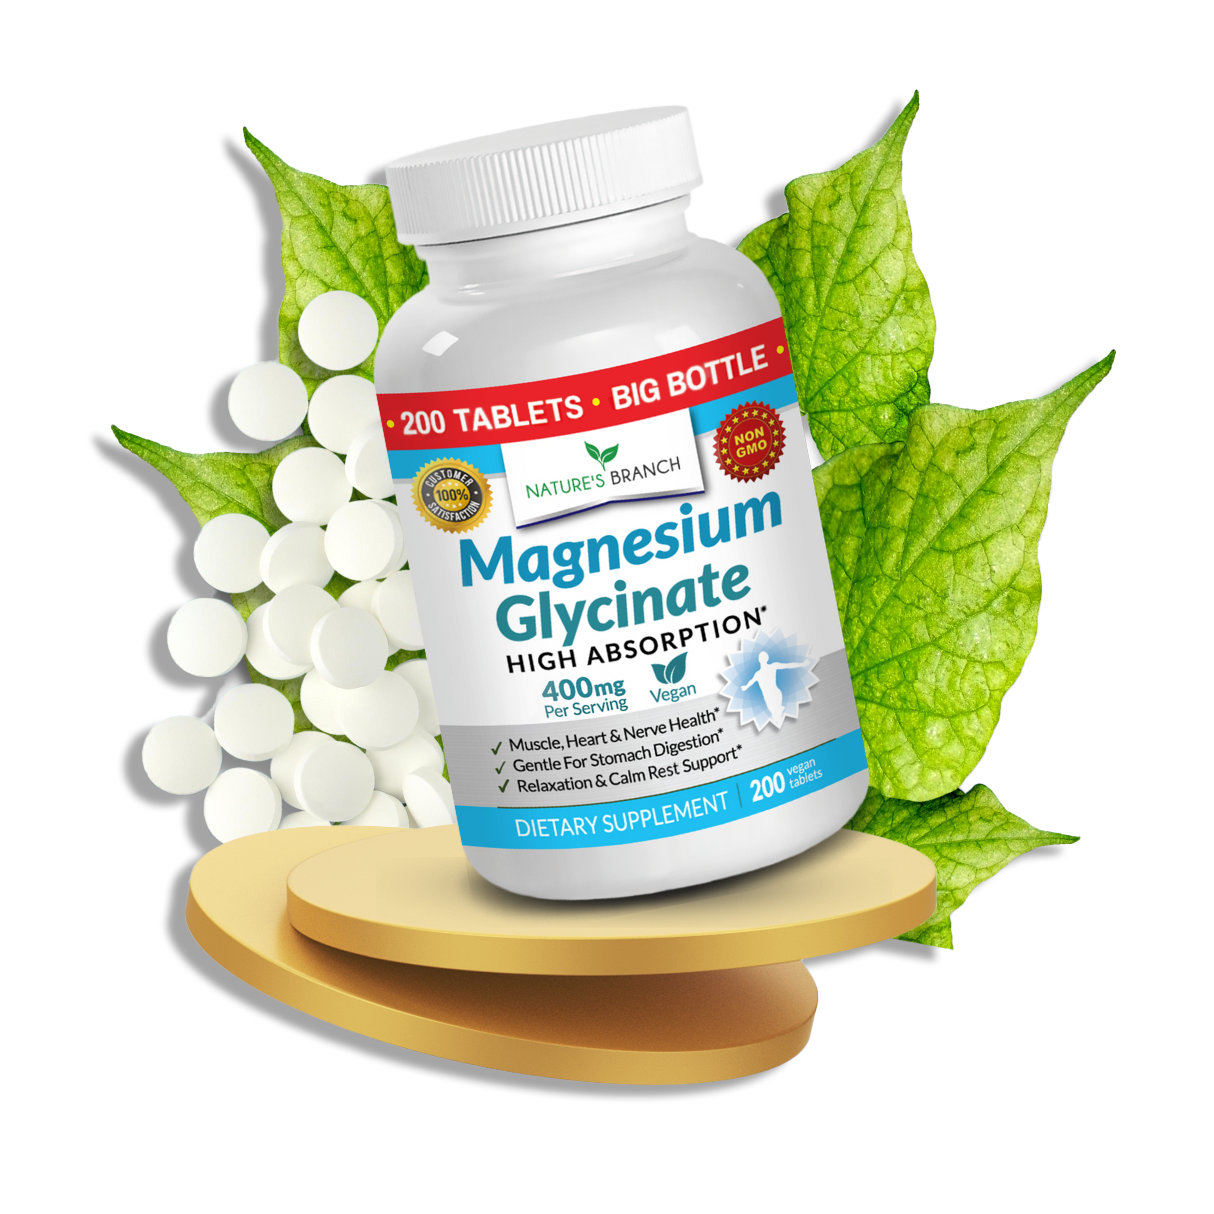 Nature's Branch Magnesium Glycinate supplements with white tablets on a platform with green leaves